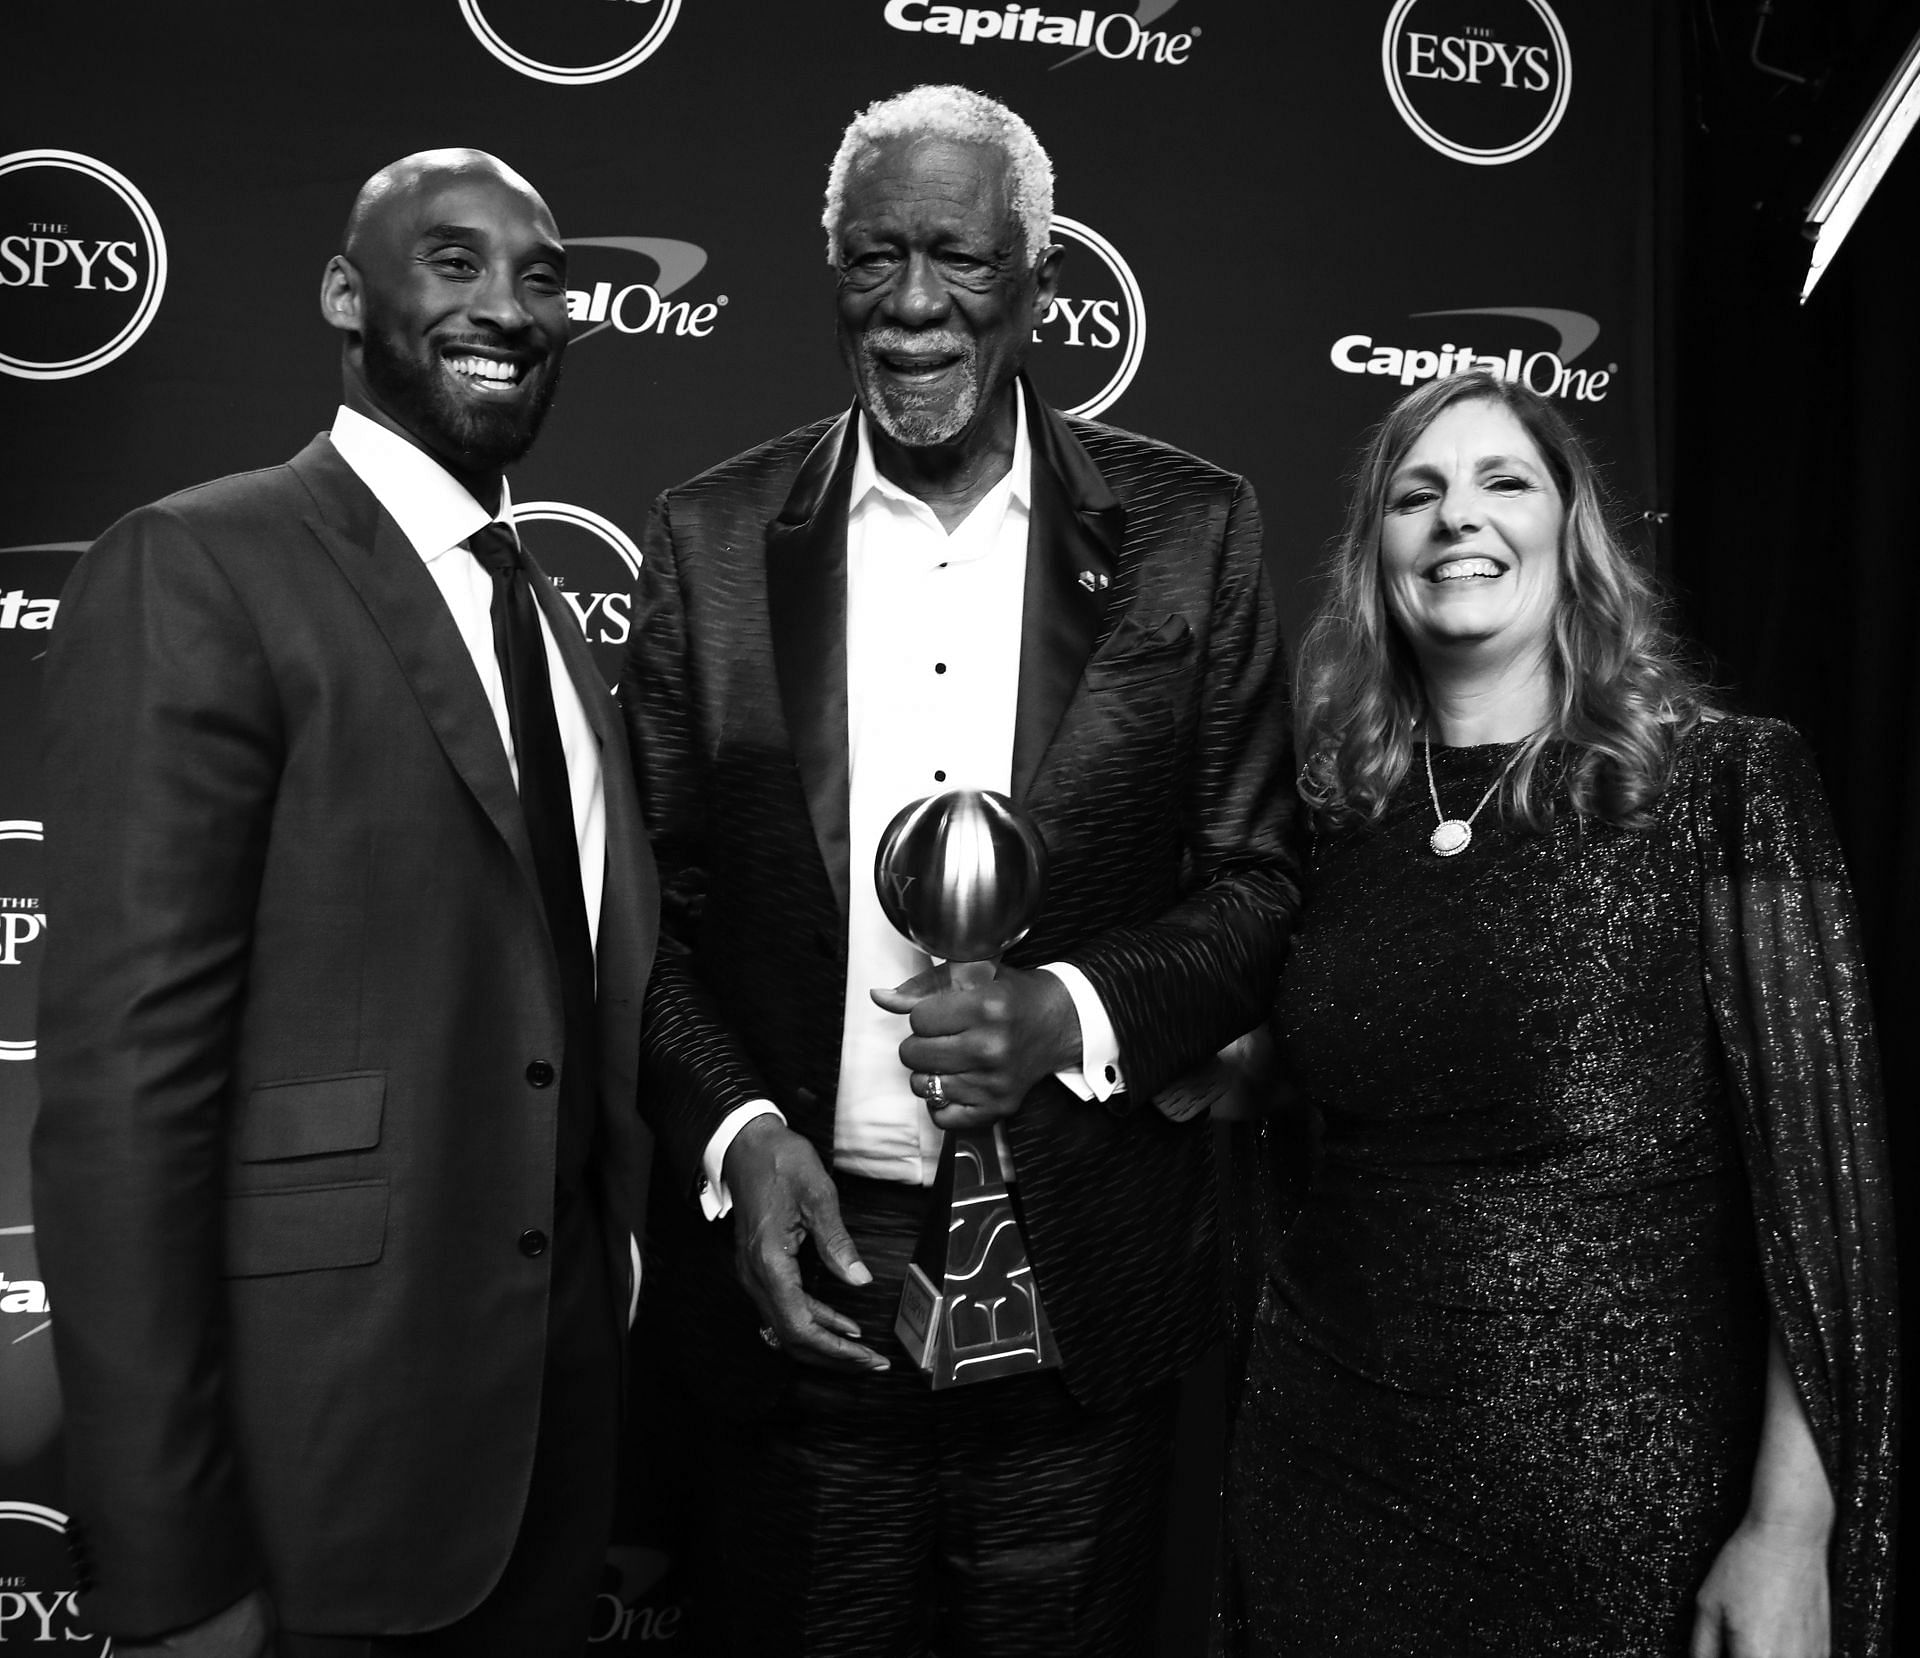 Koby Bryant, left, and Bill Russell, center, at The 2019 ESPYs